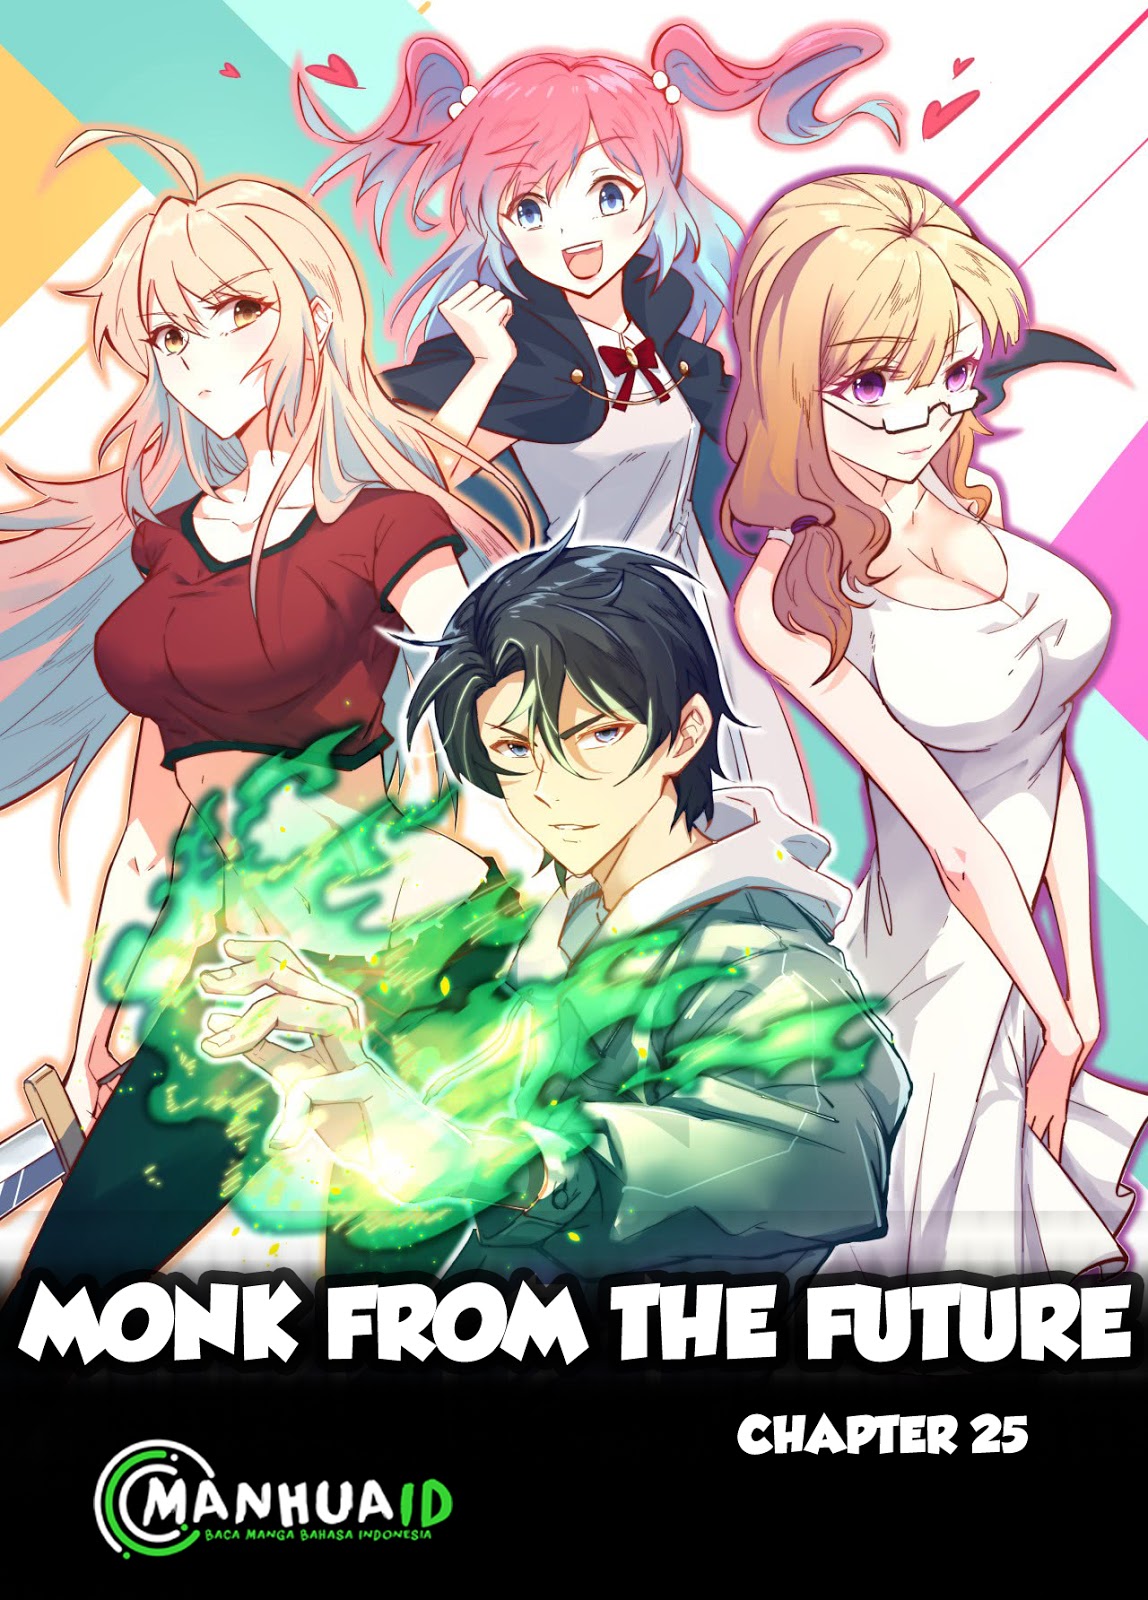 Monk From the Future Chapter 25